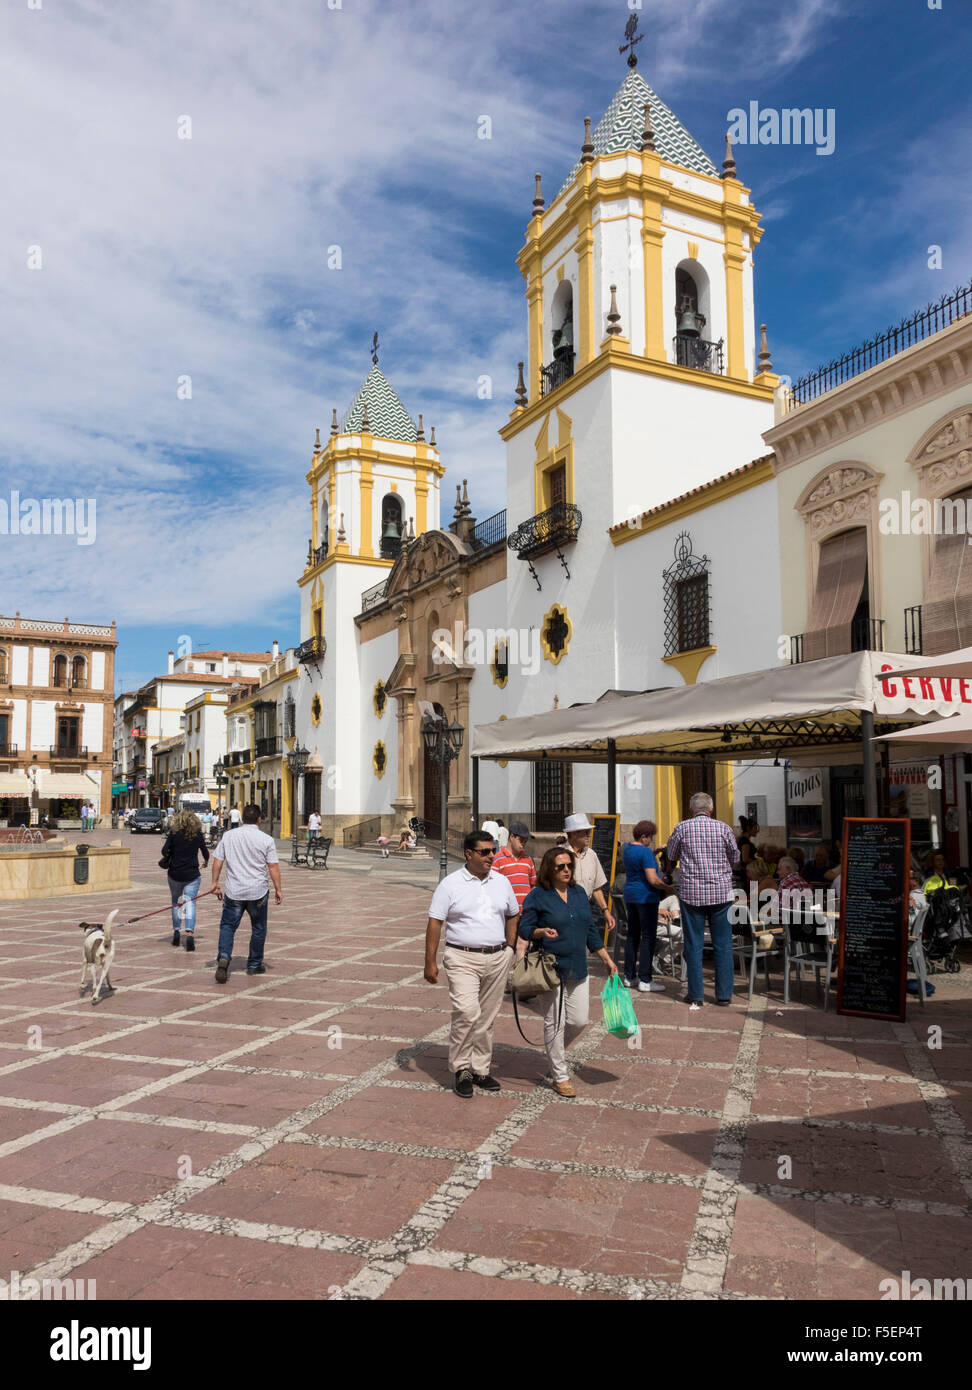 Ronda, Andalucia, Spain - Plaza del Socorro and ornate white painted church with tourists and locals Stock Photo